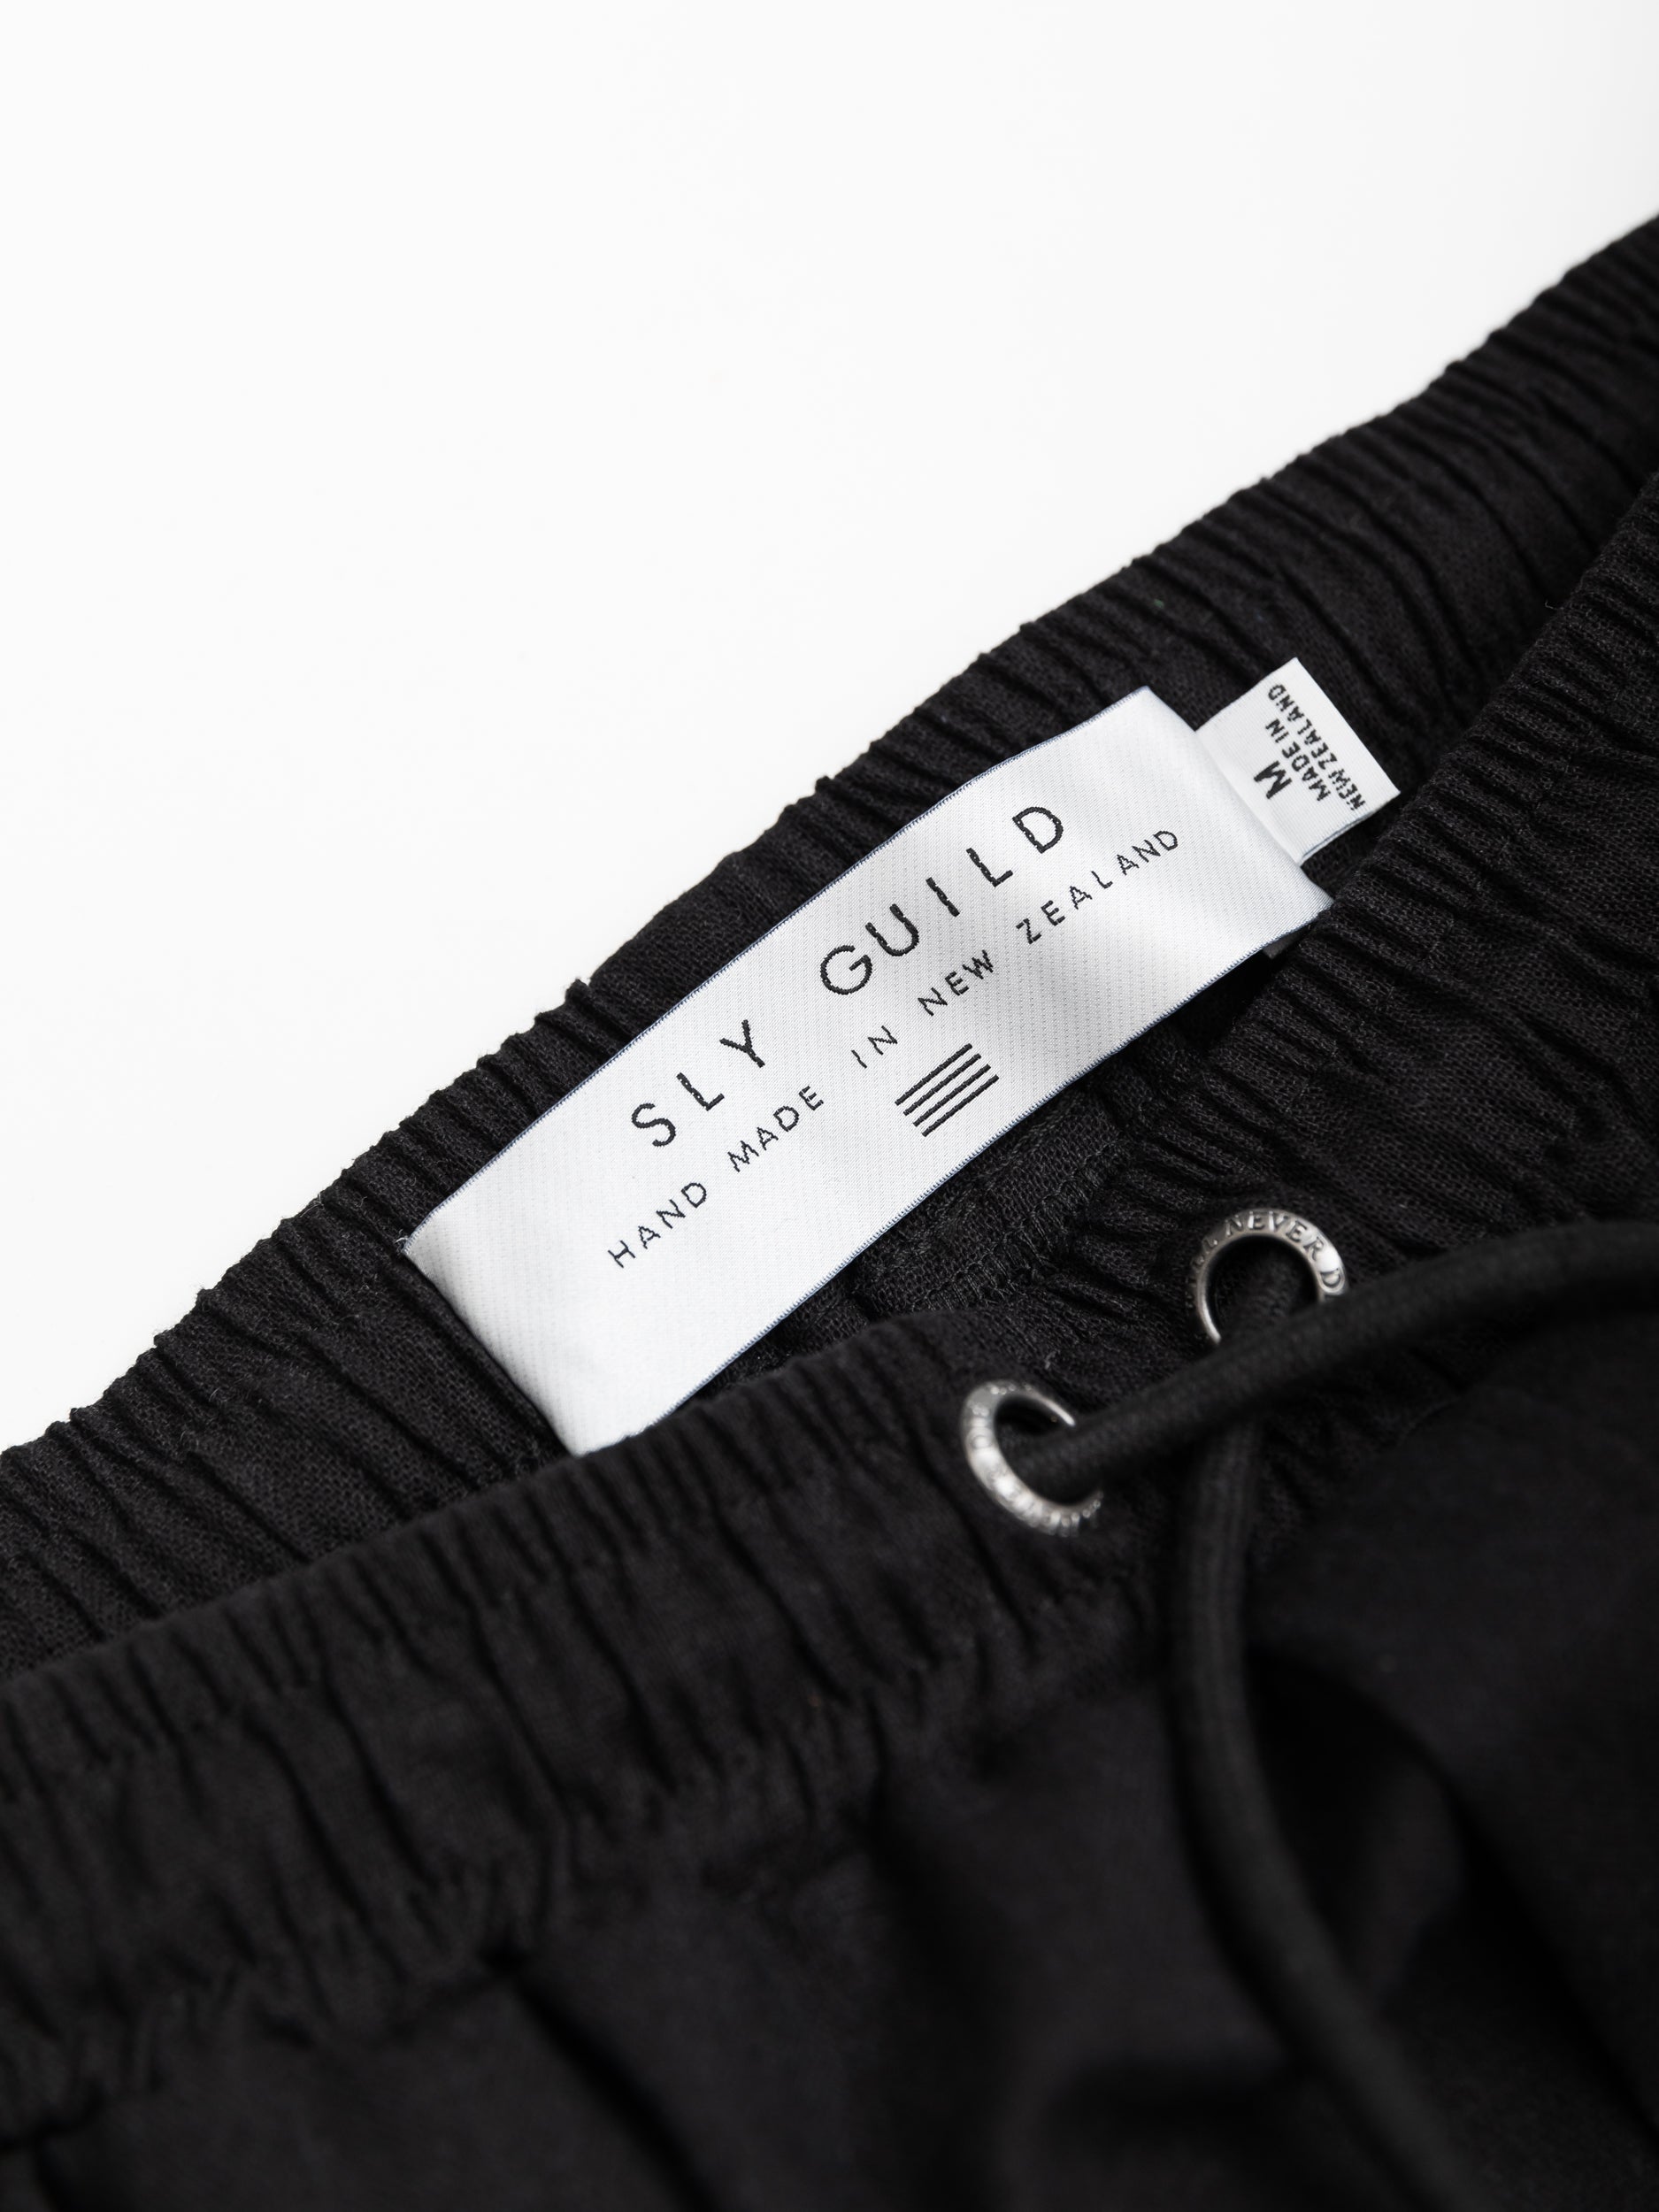 Made in New Zealand Men's Clothing | Sly Guild NZ